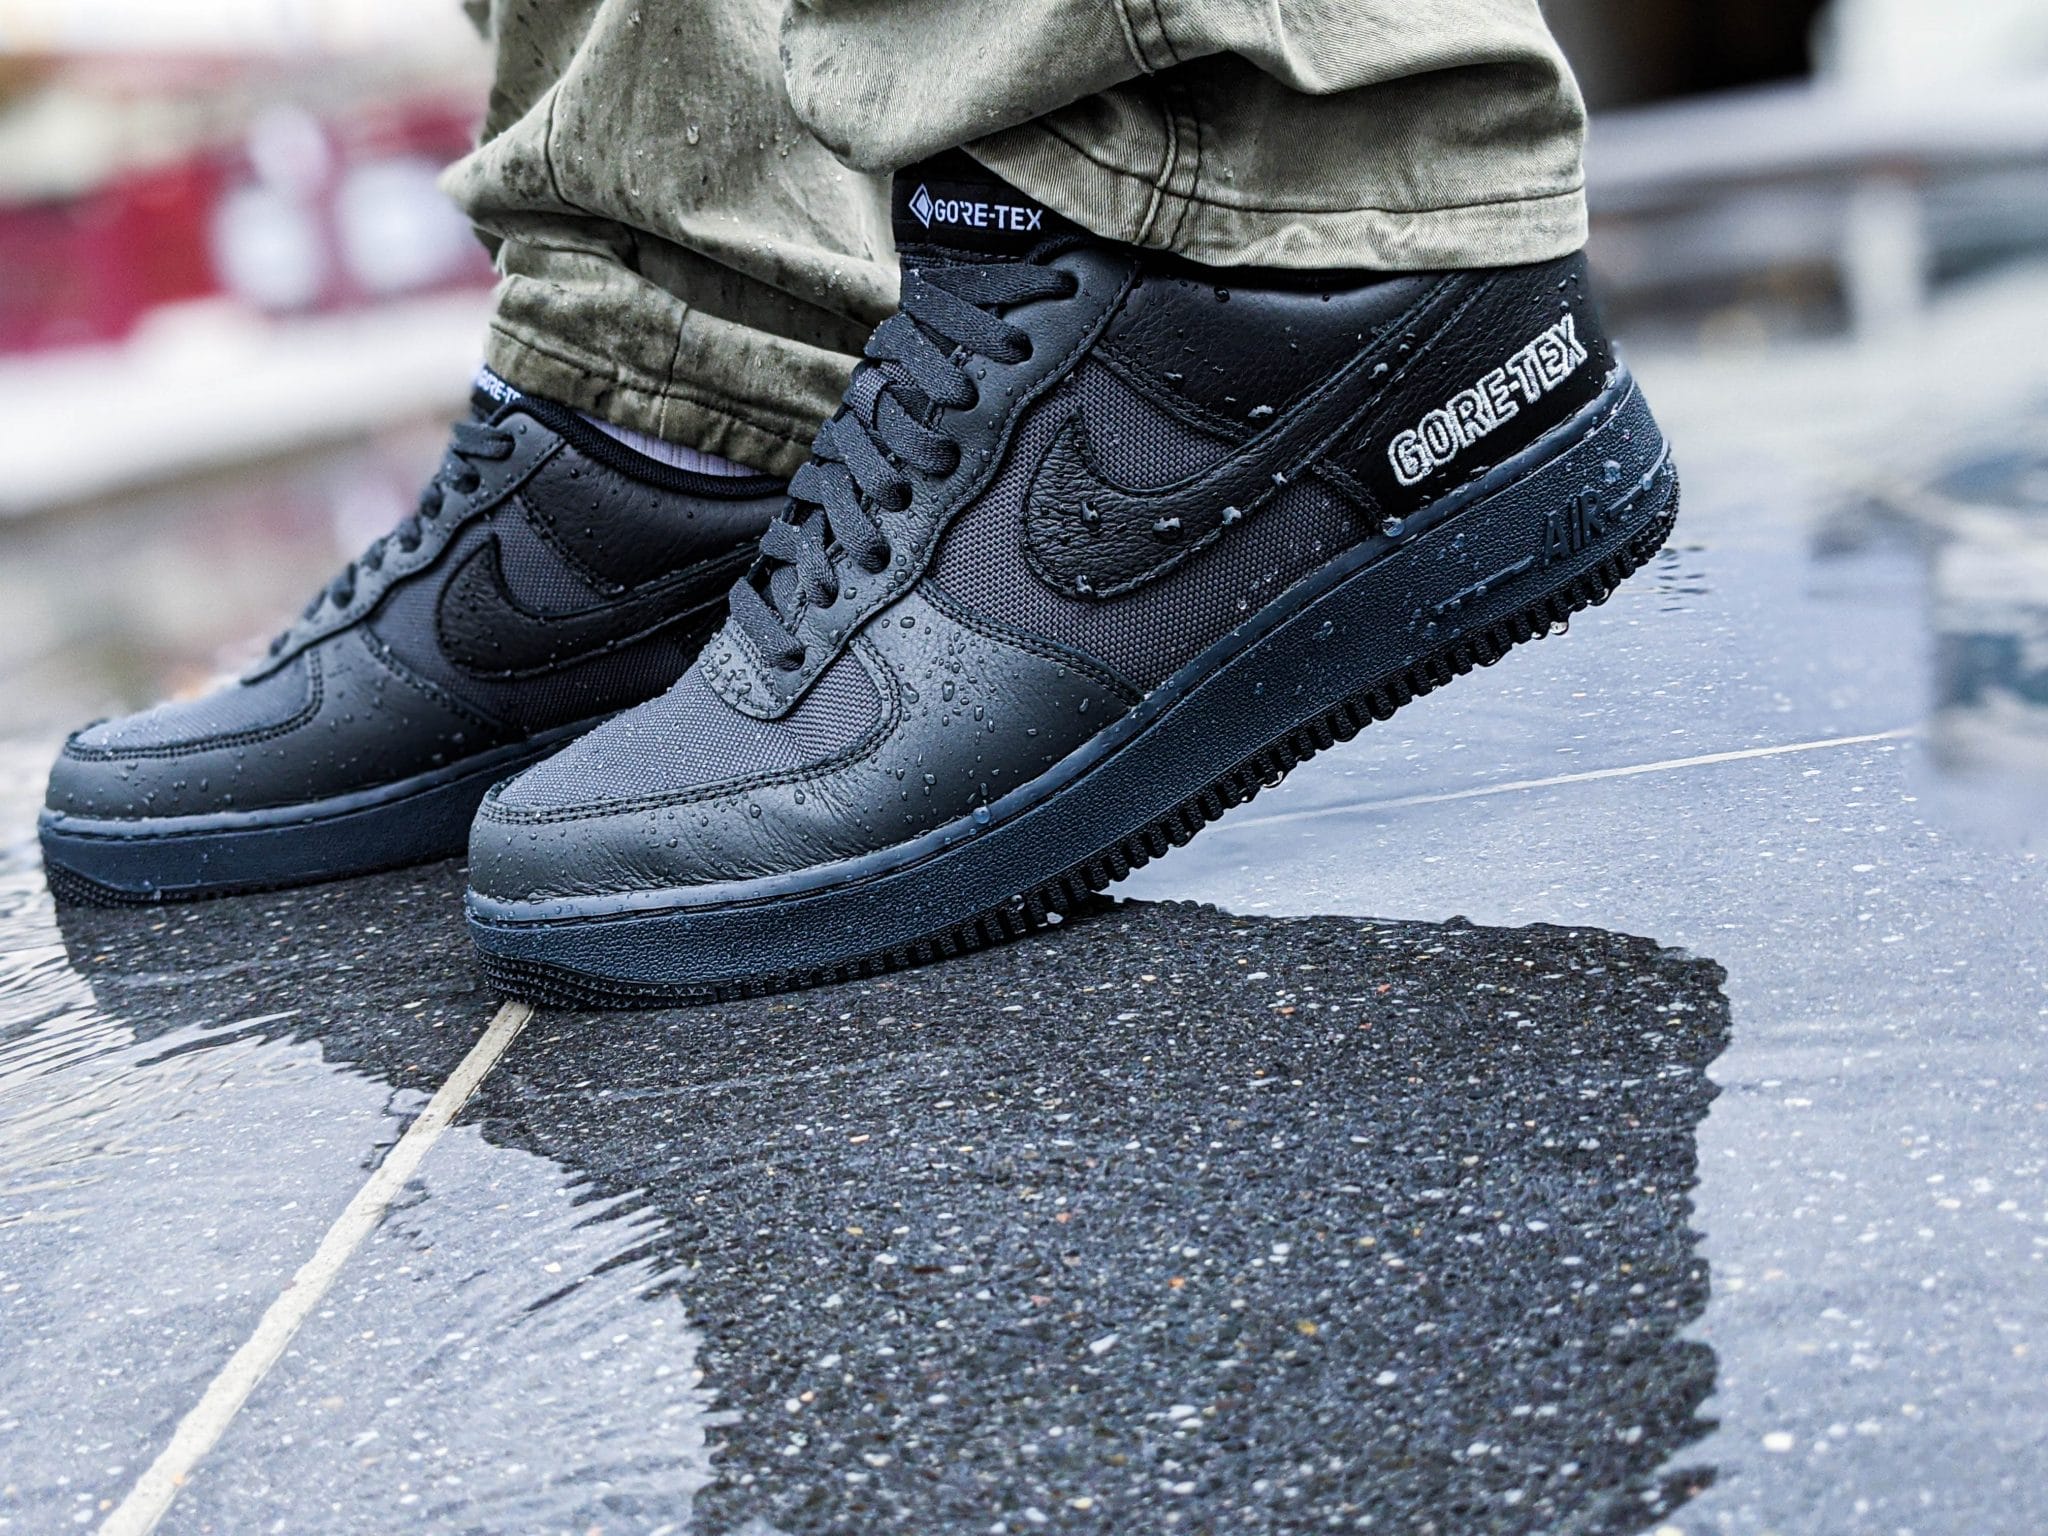 Latest Nike Air Force GORE-TEX "Anthracite" |